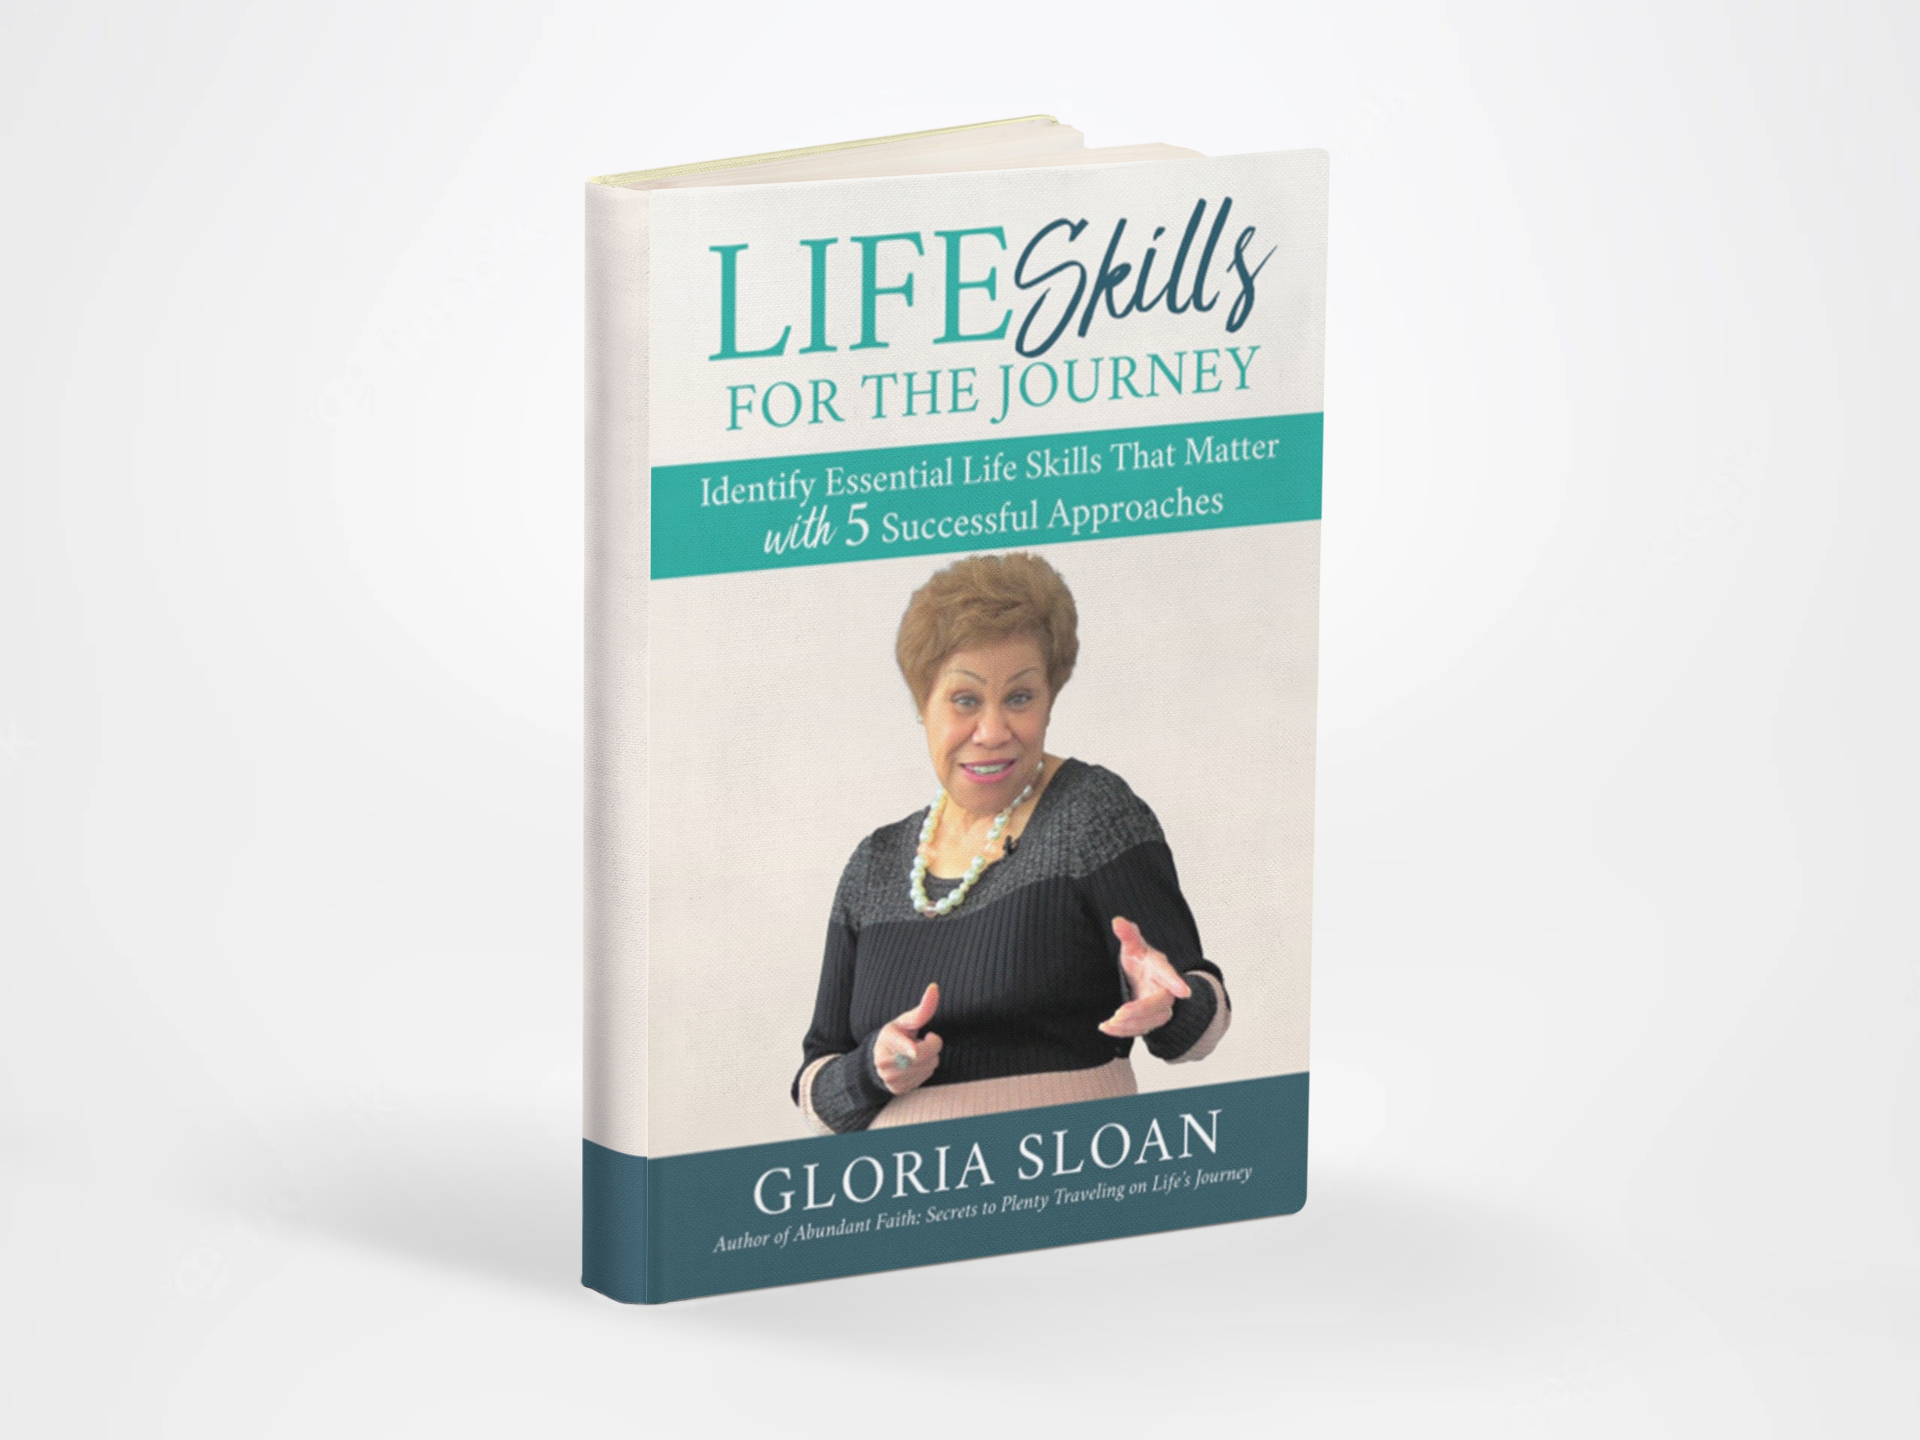 Life Skills for the Journey by Gloria Sloan Offers an Inspired and Practical Approach to Personal and Professional Development